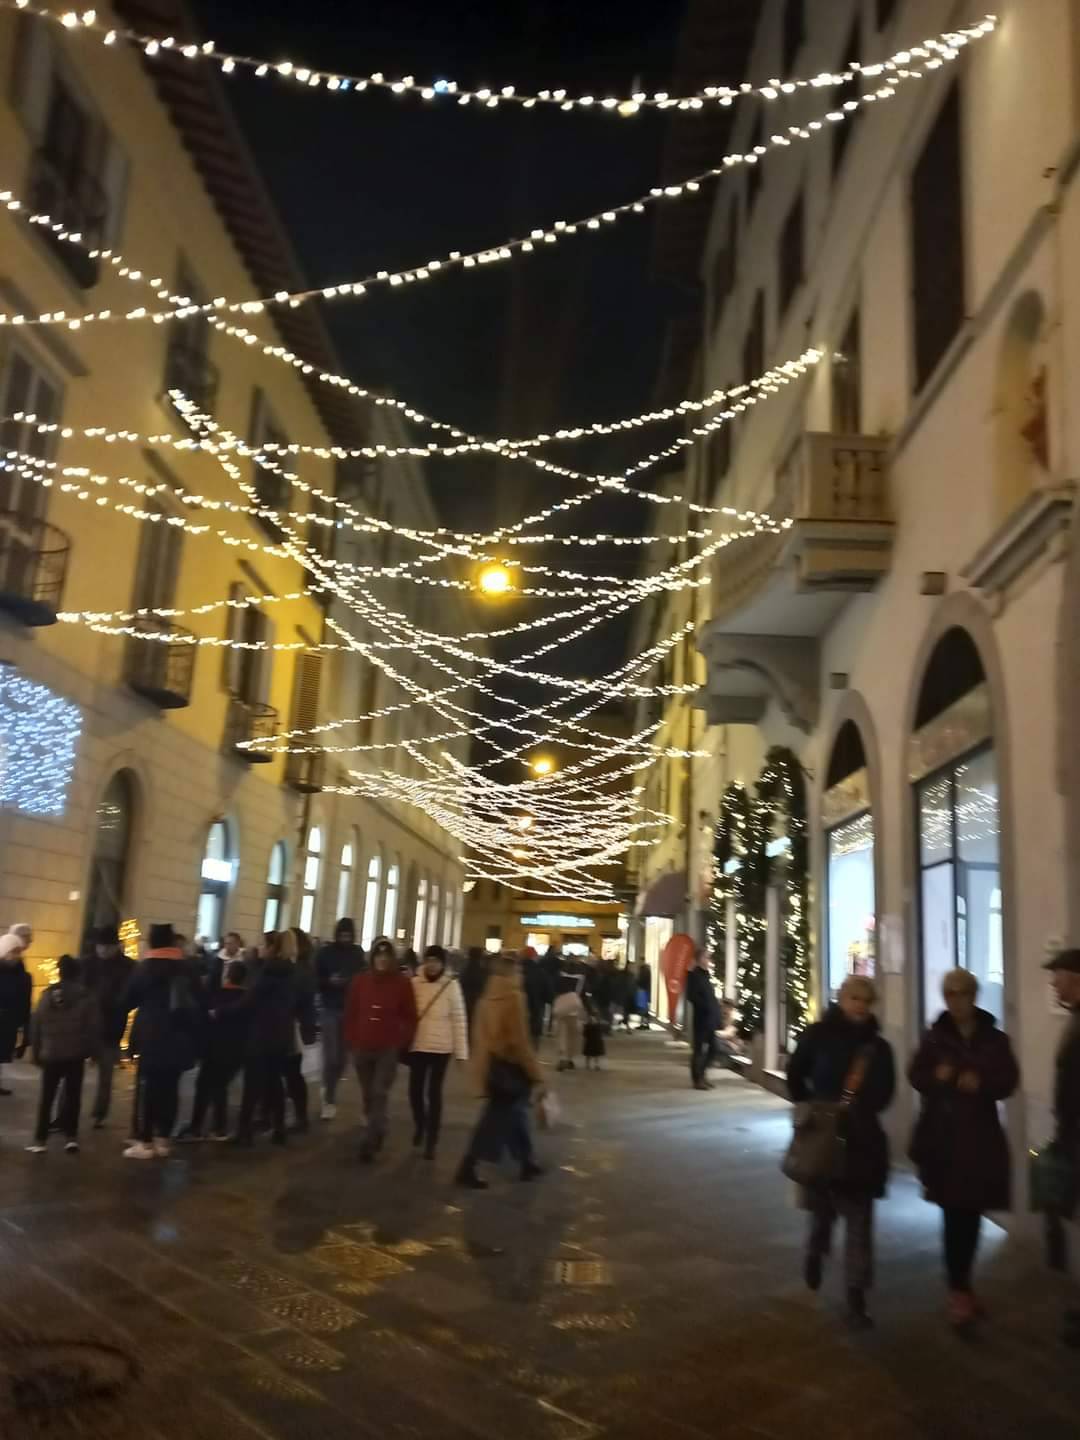 These are the lights on the streets for going to the main square, lights are really charming.